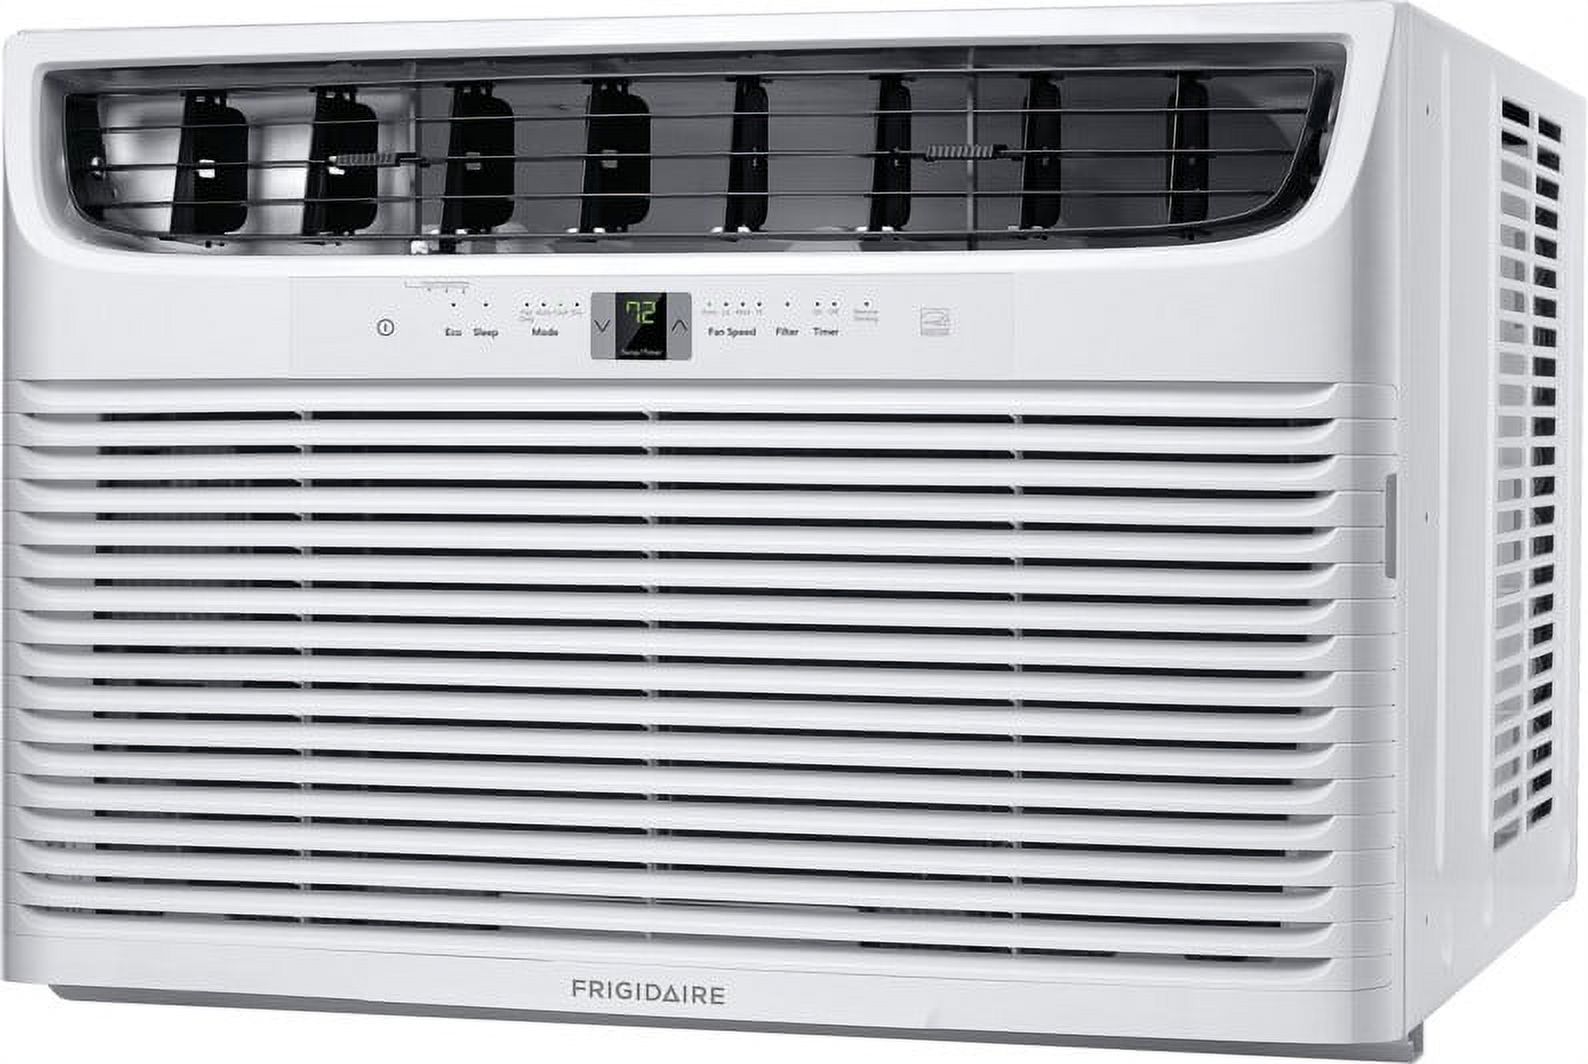 Frigidaire 25,000 BTU 230-Volt Window Air Conditioner with Slide-Out Chassis, Energy Star, FHWC253WB2 - image 1 of 5